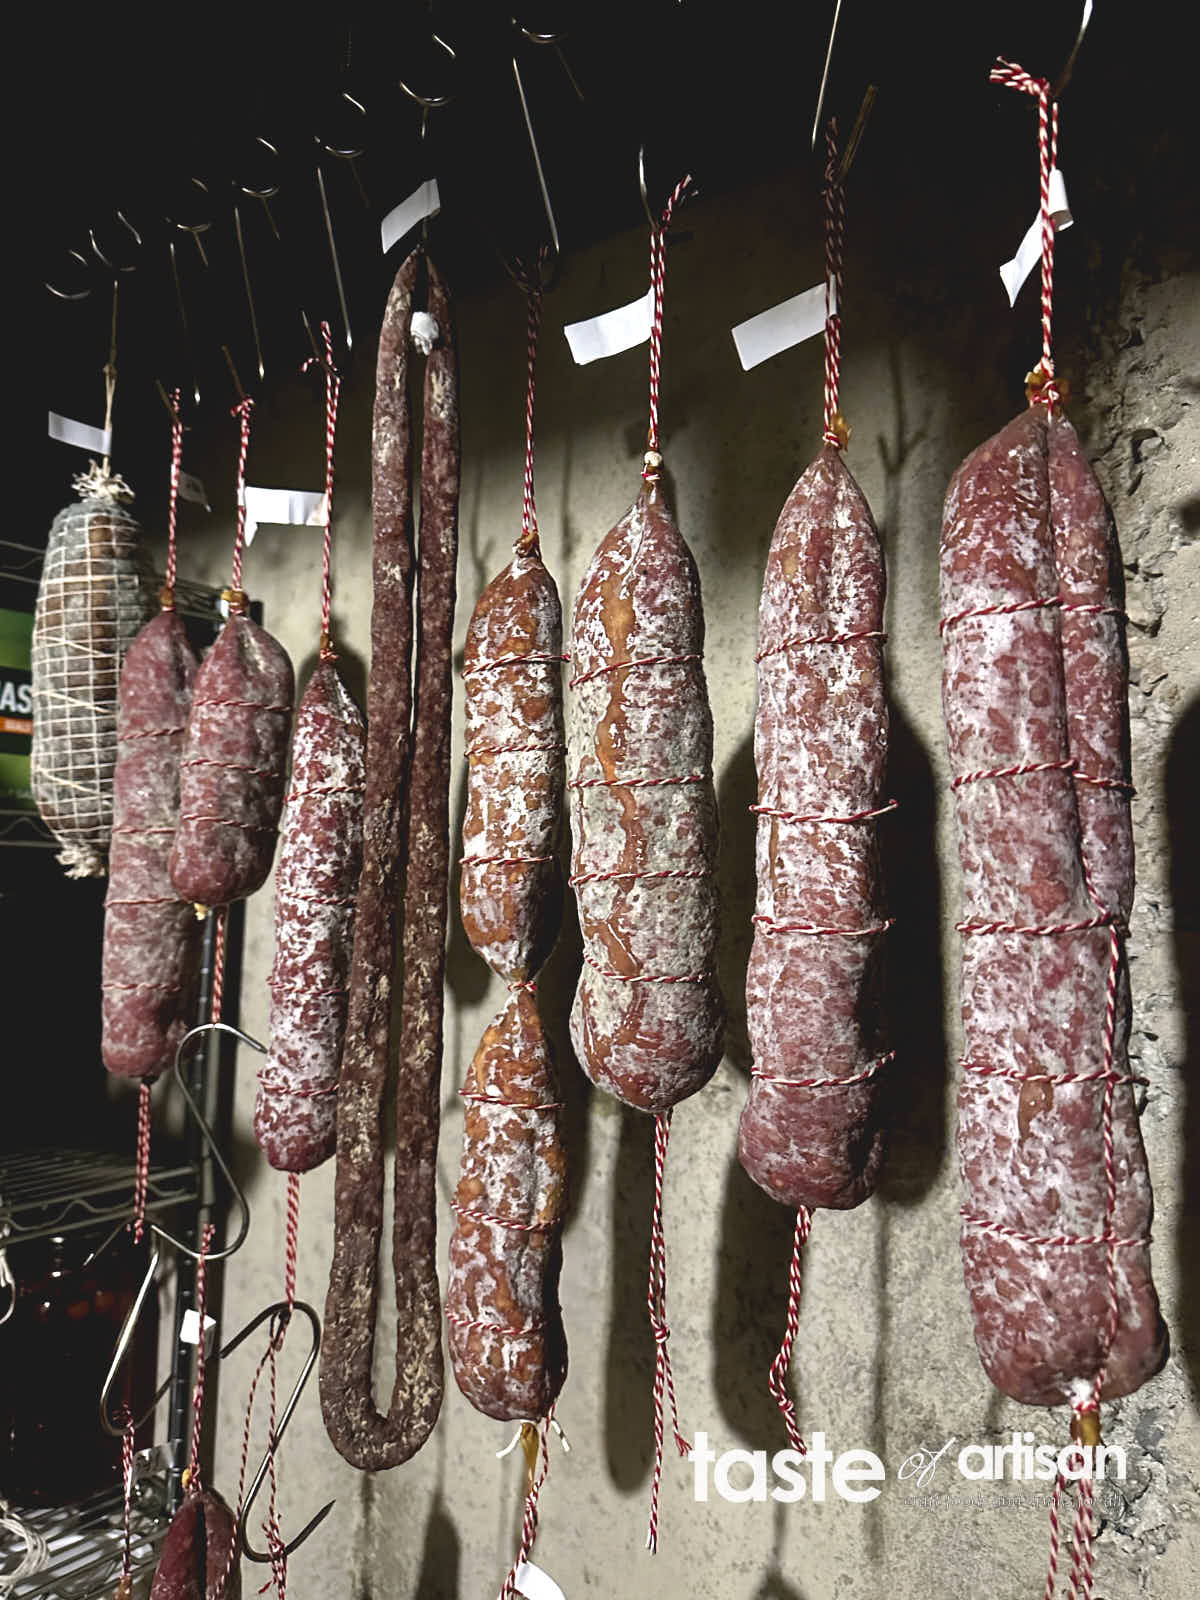 Salami and capicala hanging in a meat curing cellar.